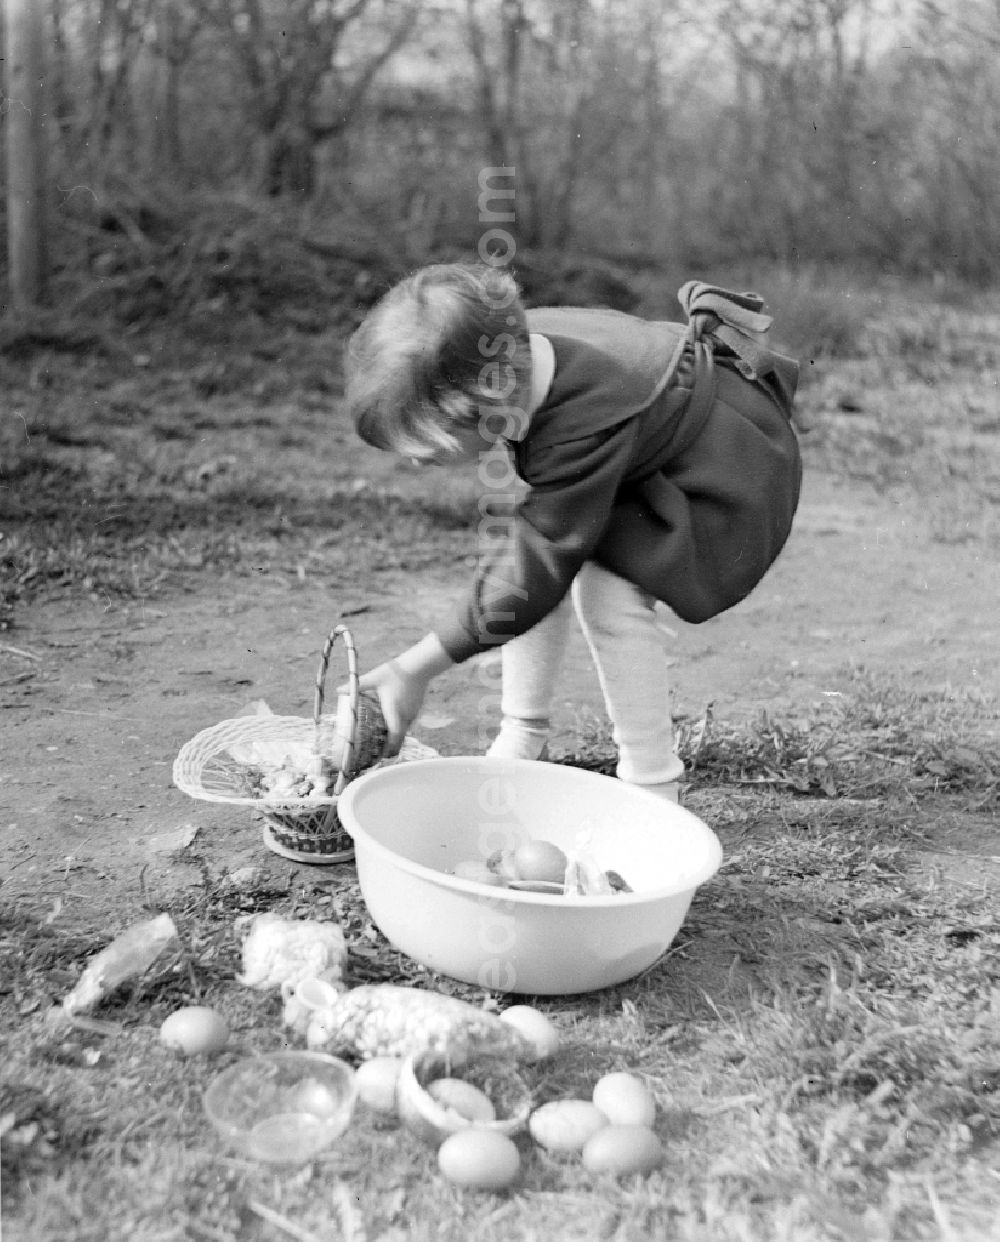 GDR image archive: Zschopau - A small child in a dress with the Easter egg look in the garden in Zschopau in the federal state Saxony in the area of the former GDR, German democratic republic